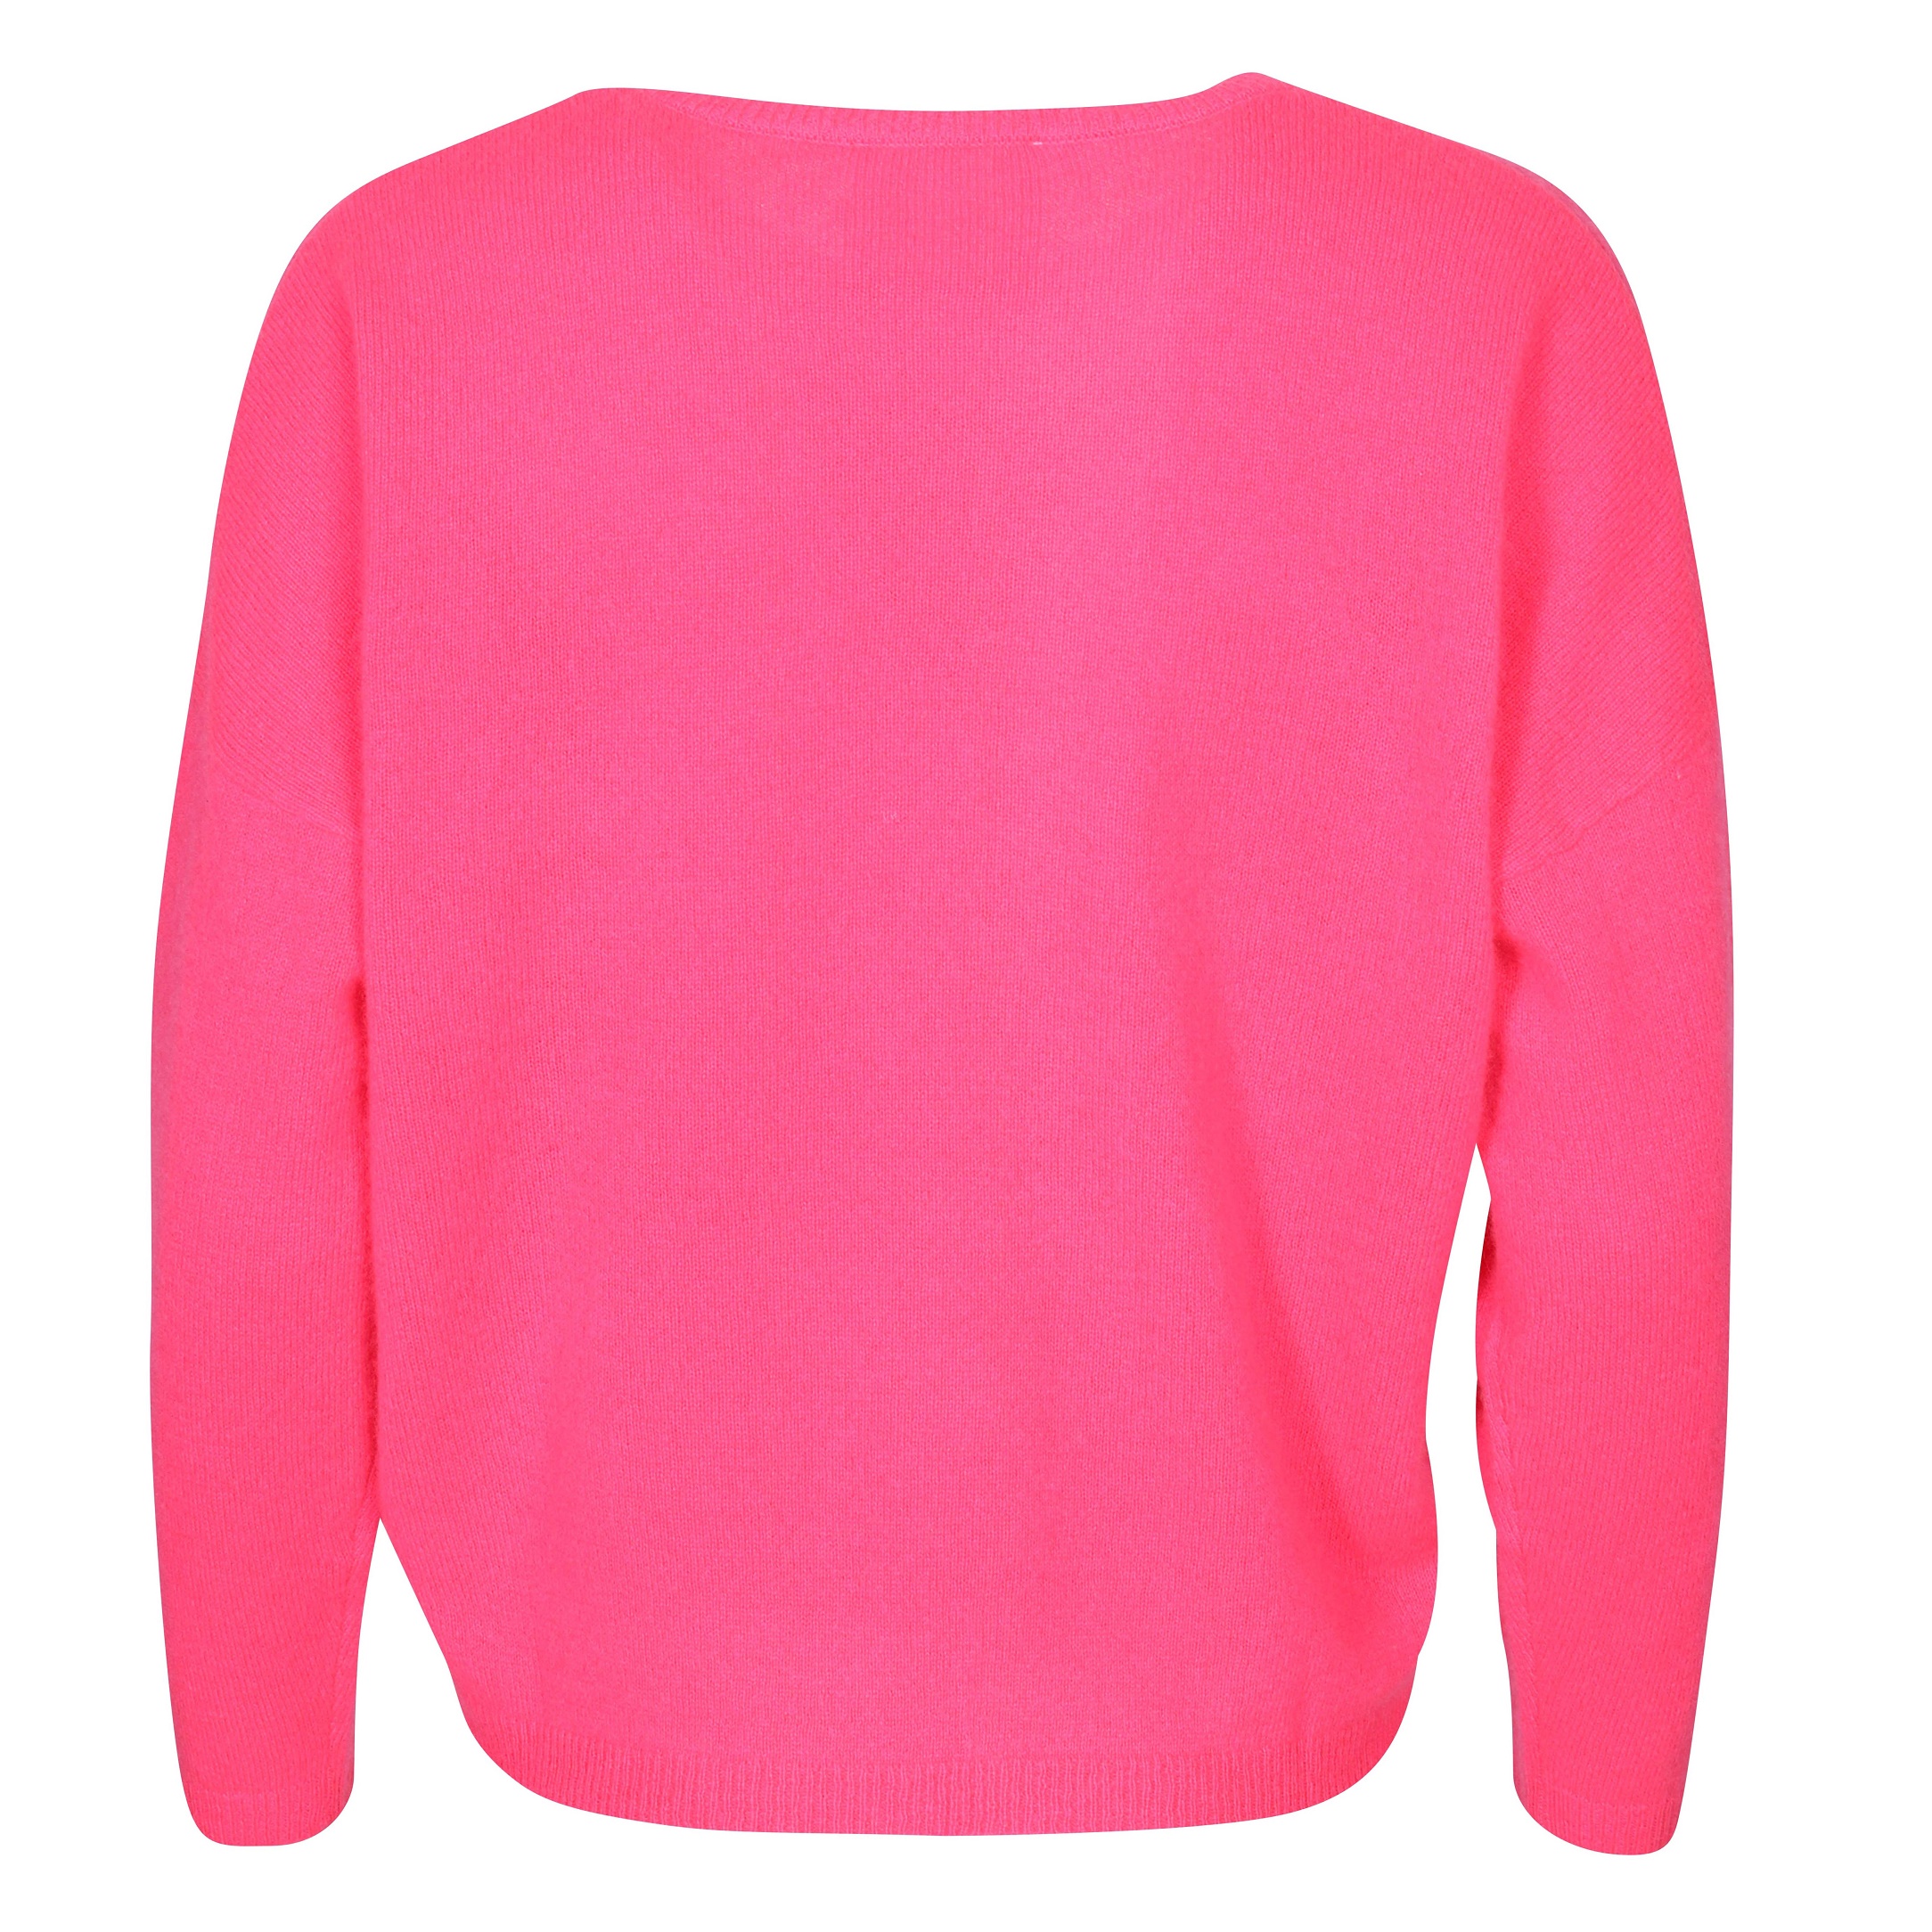 Absolut Cashmere Kaira Cashmere Pullover in Rose Fluo S